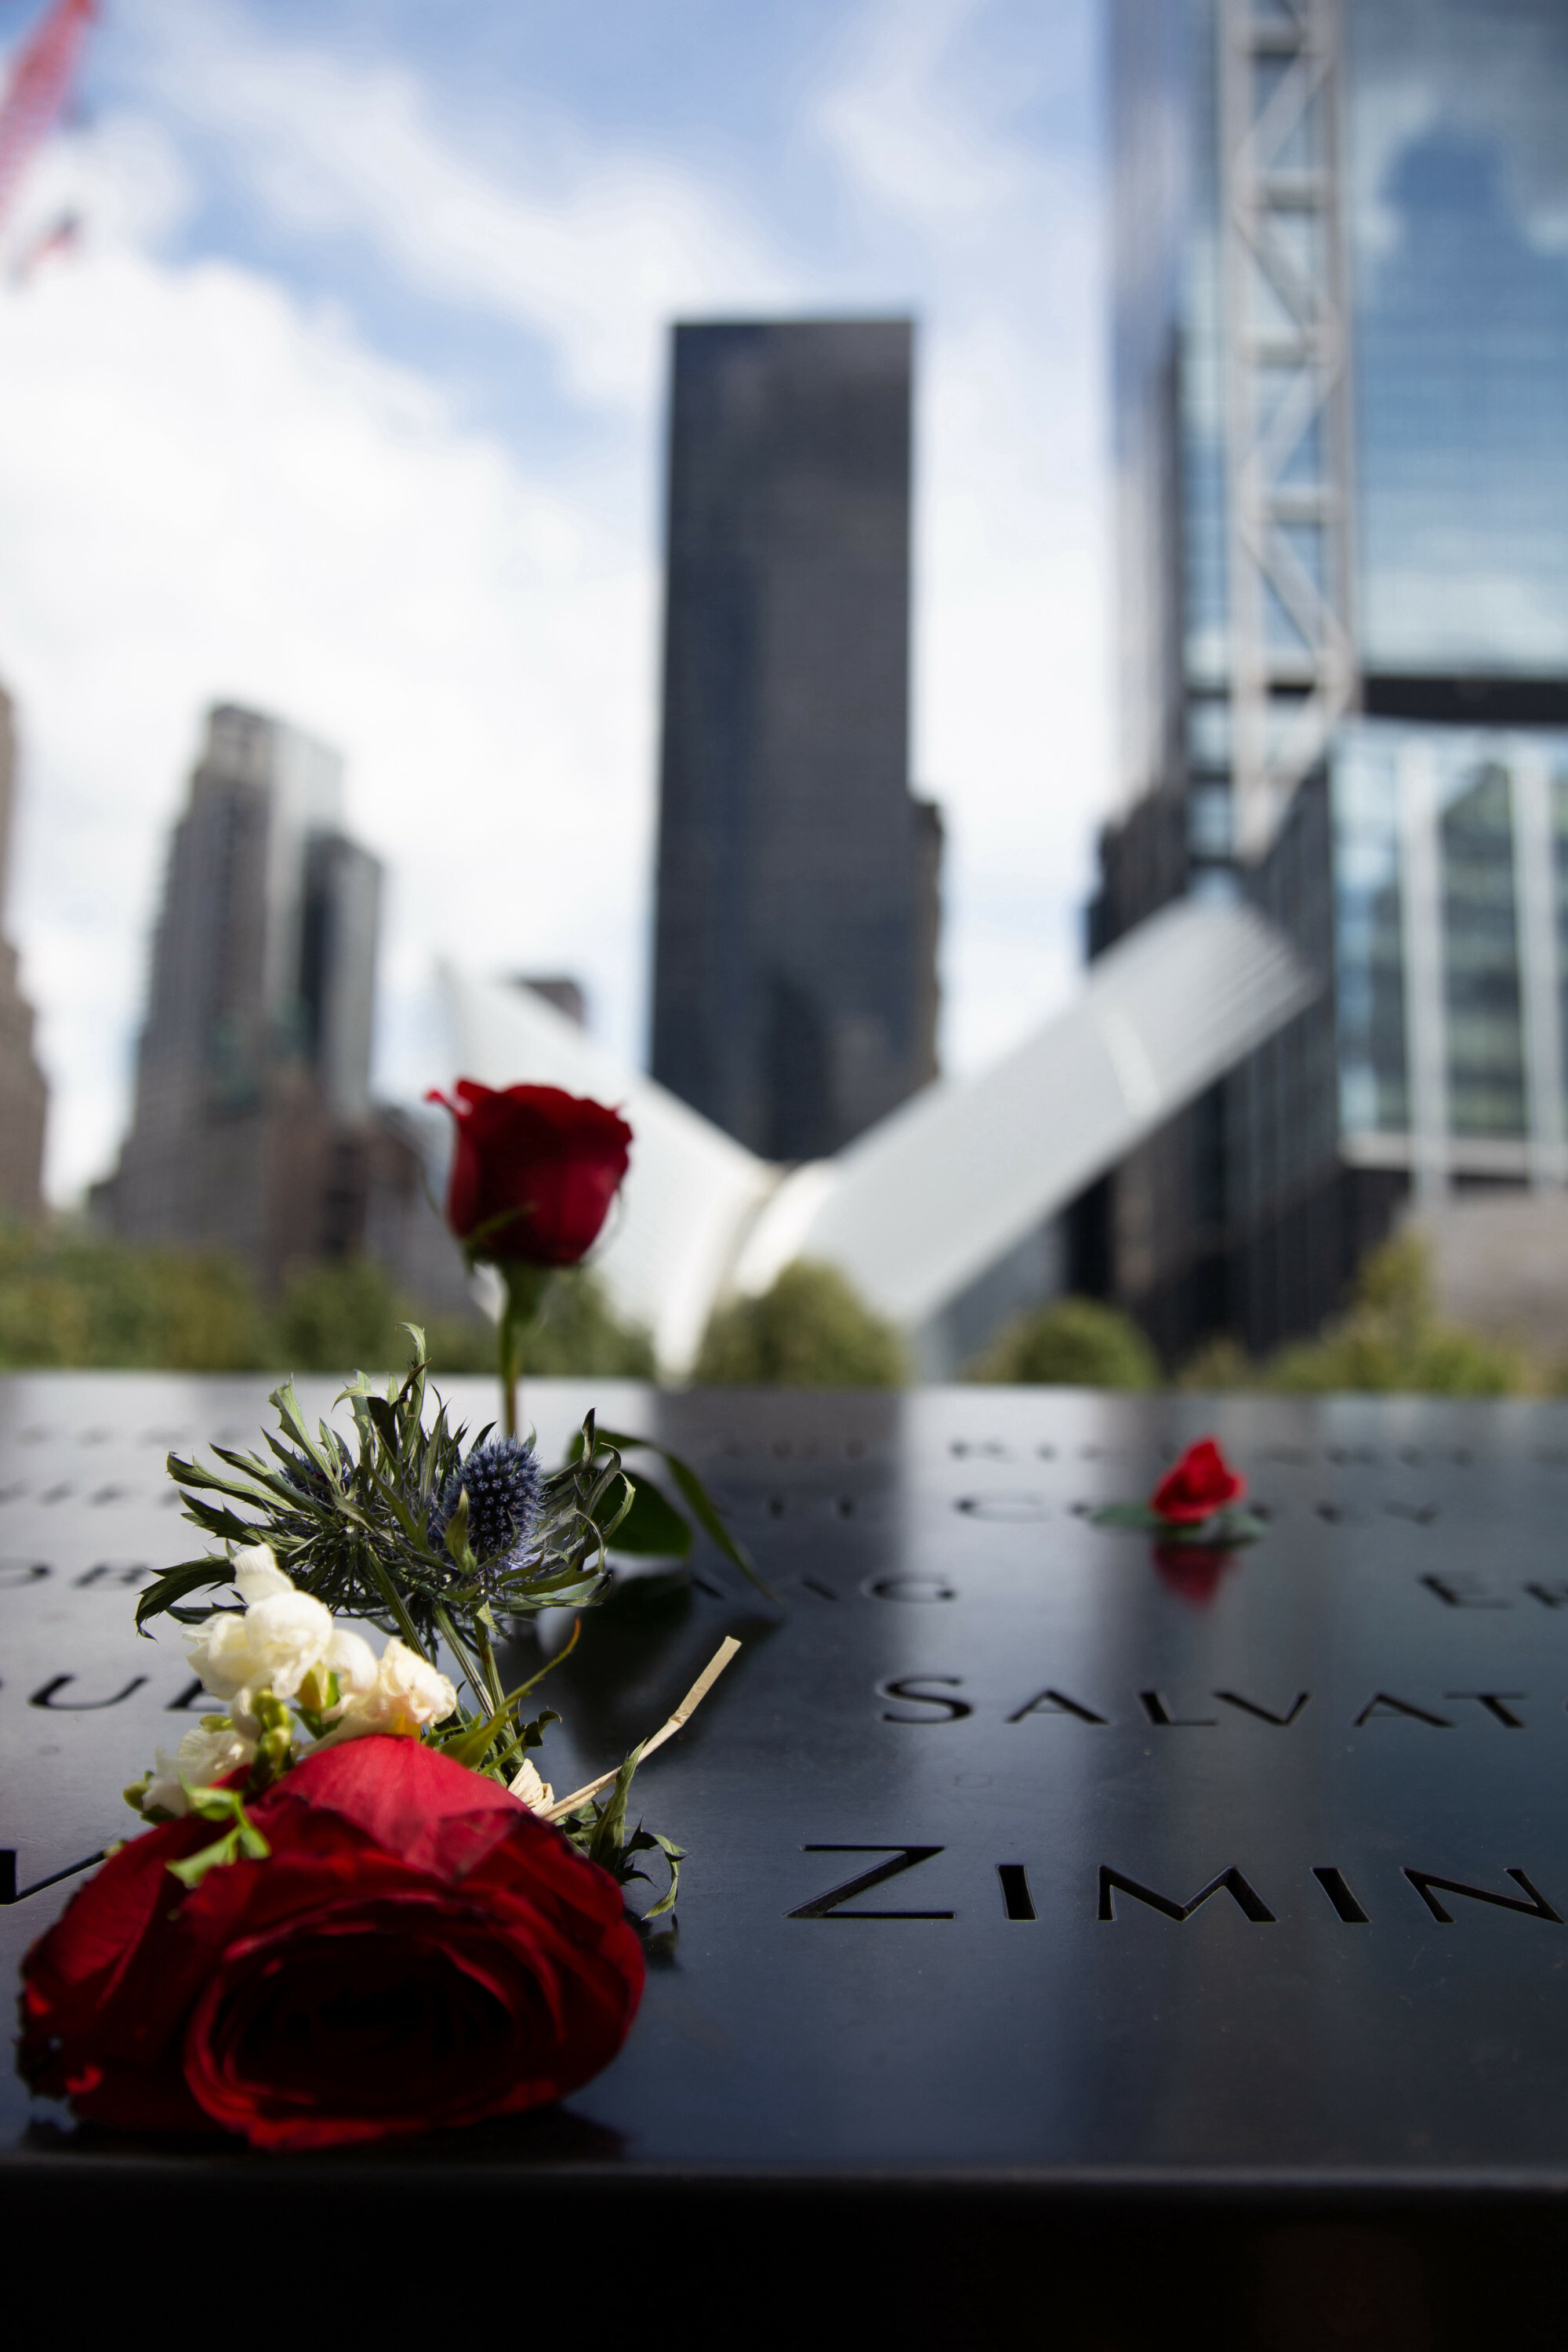 America honors 9/11 victims on 20th anniversary